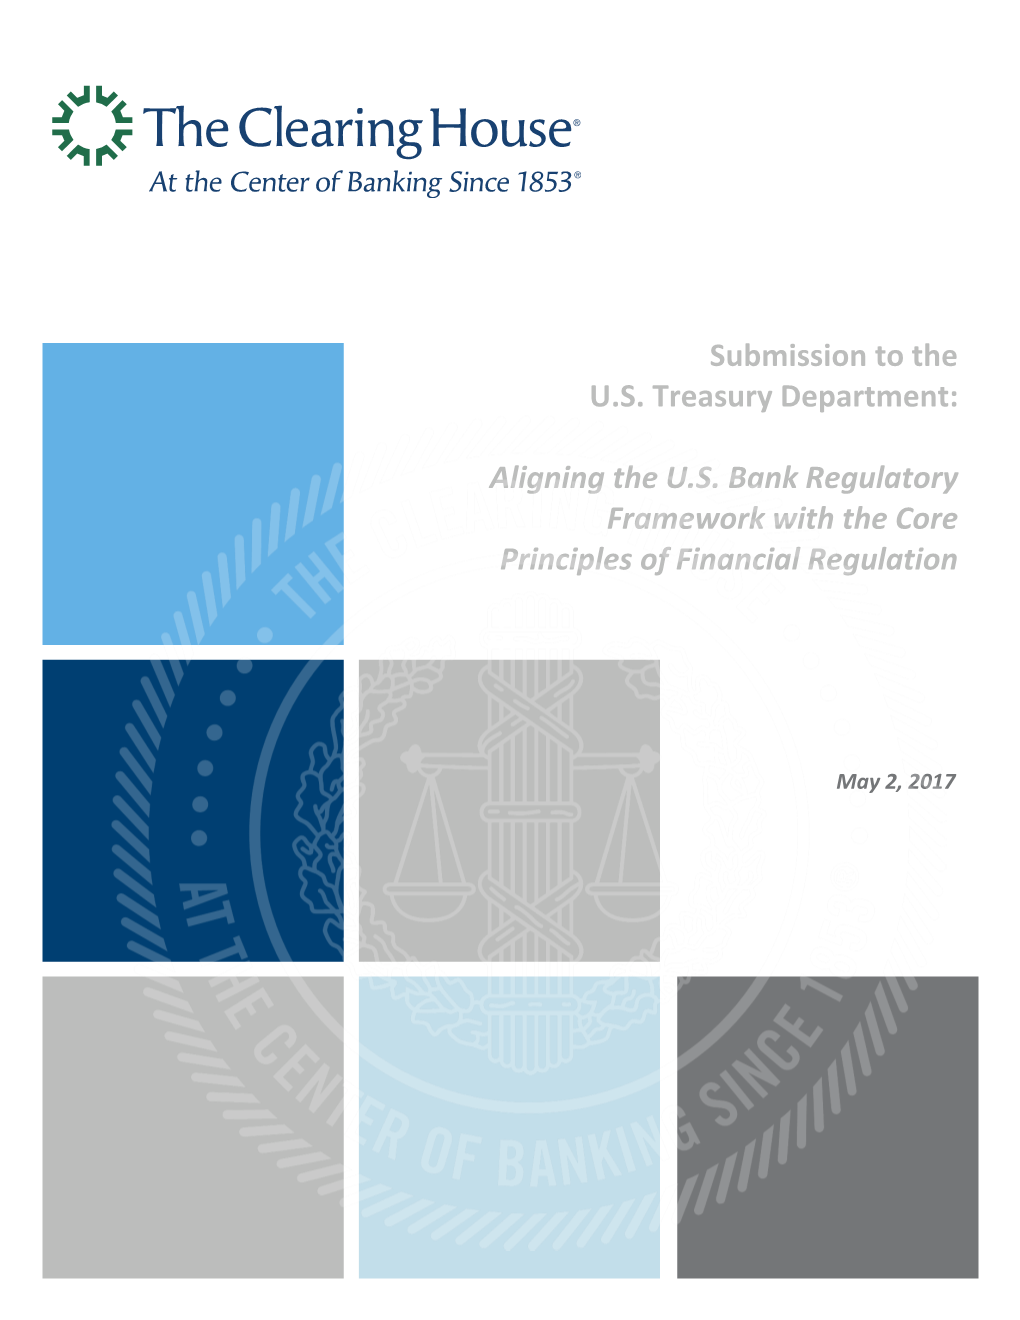 Submission to the U.S. Treasury Department: Aligning the U.S. Bank